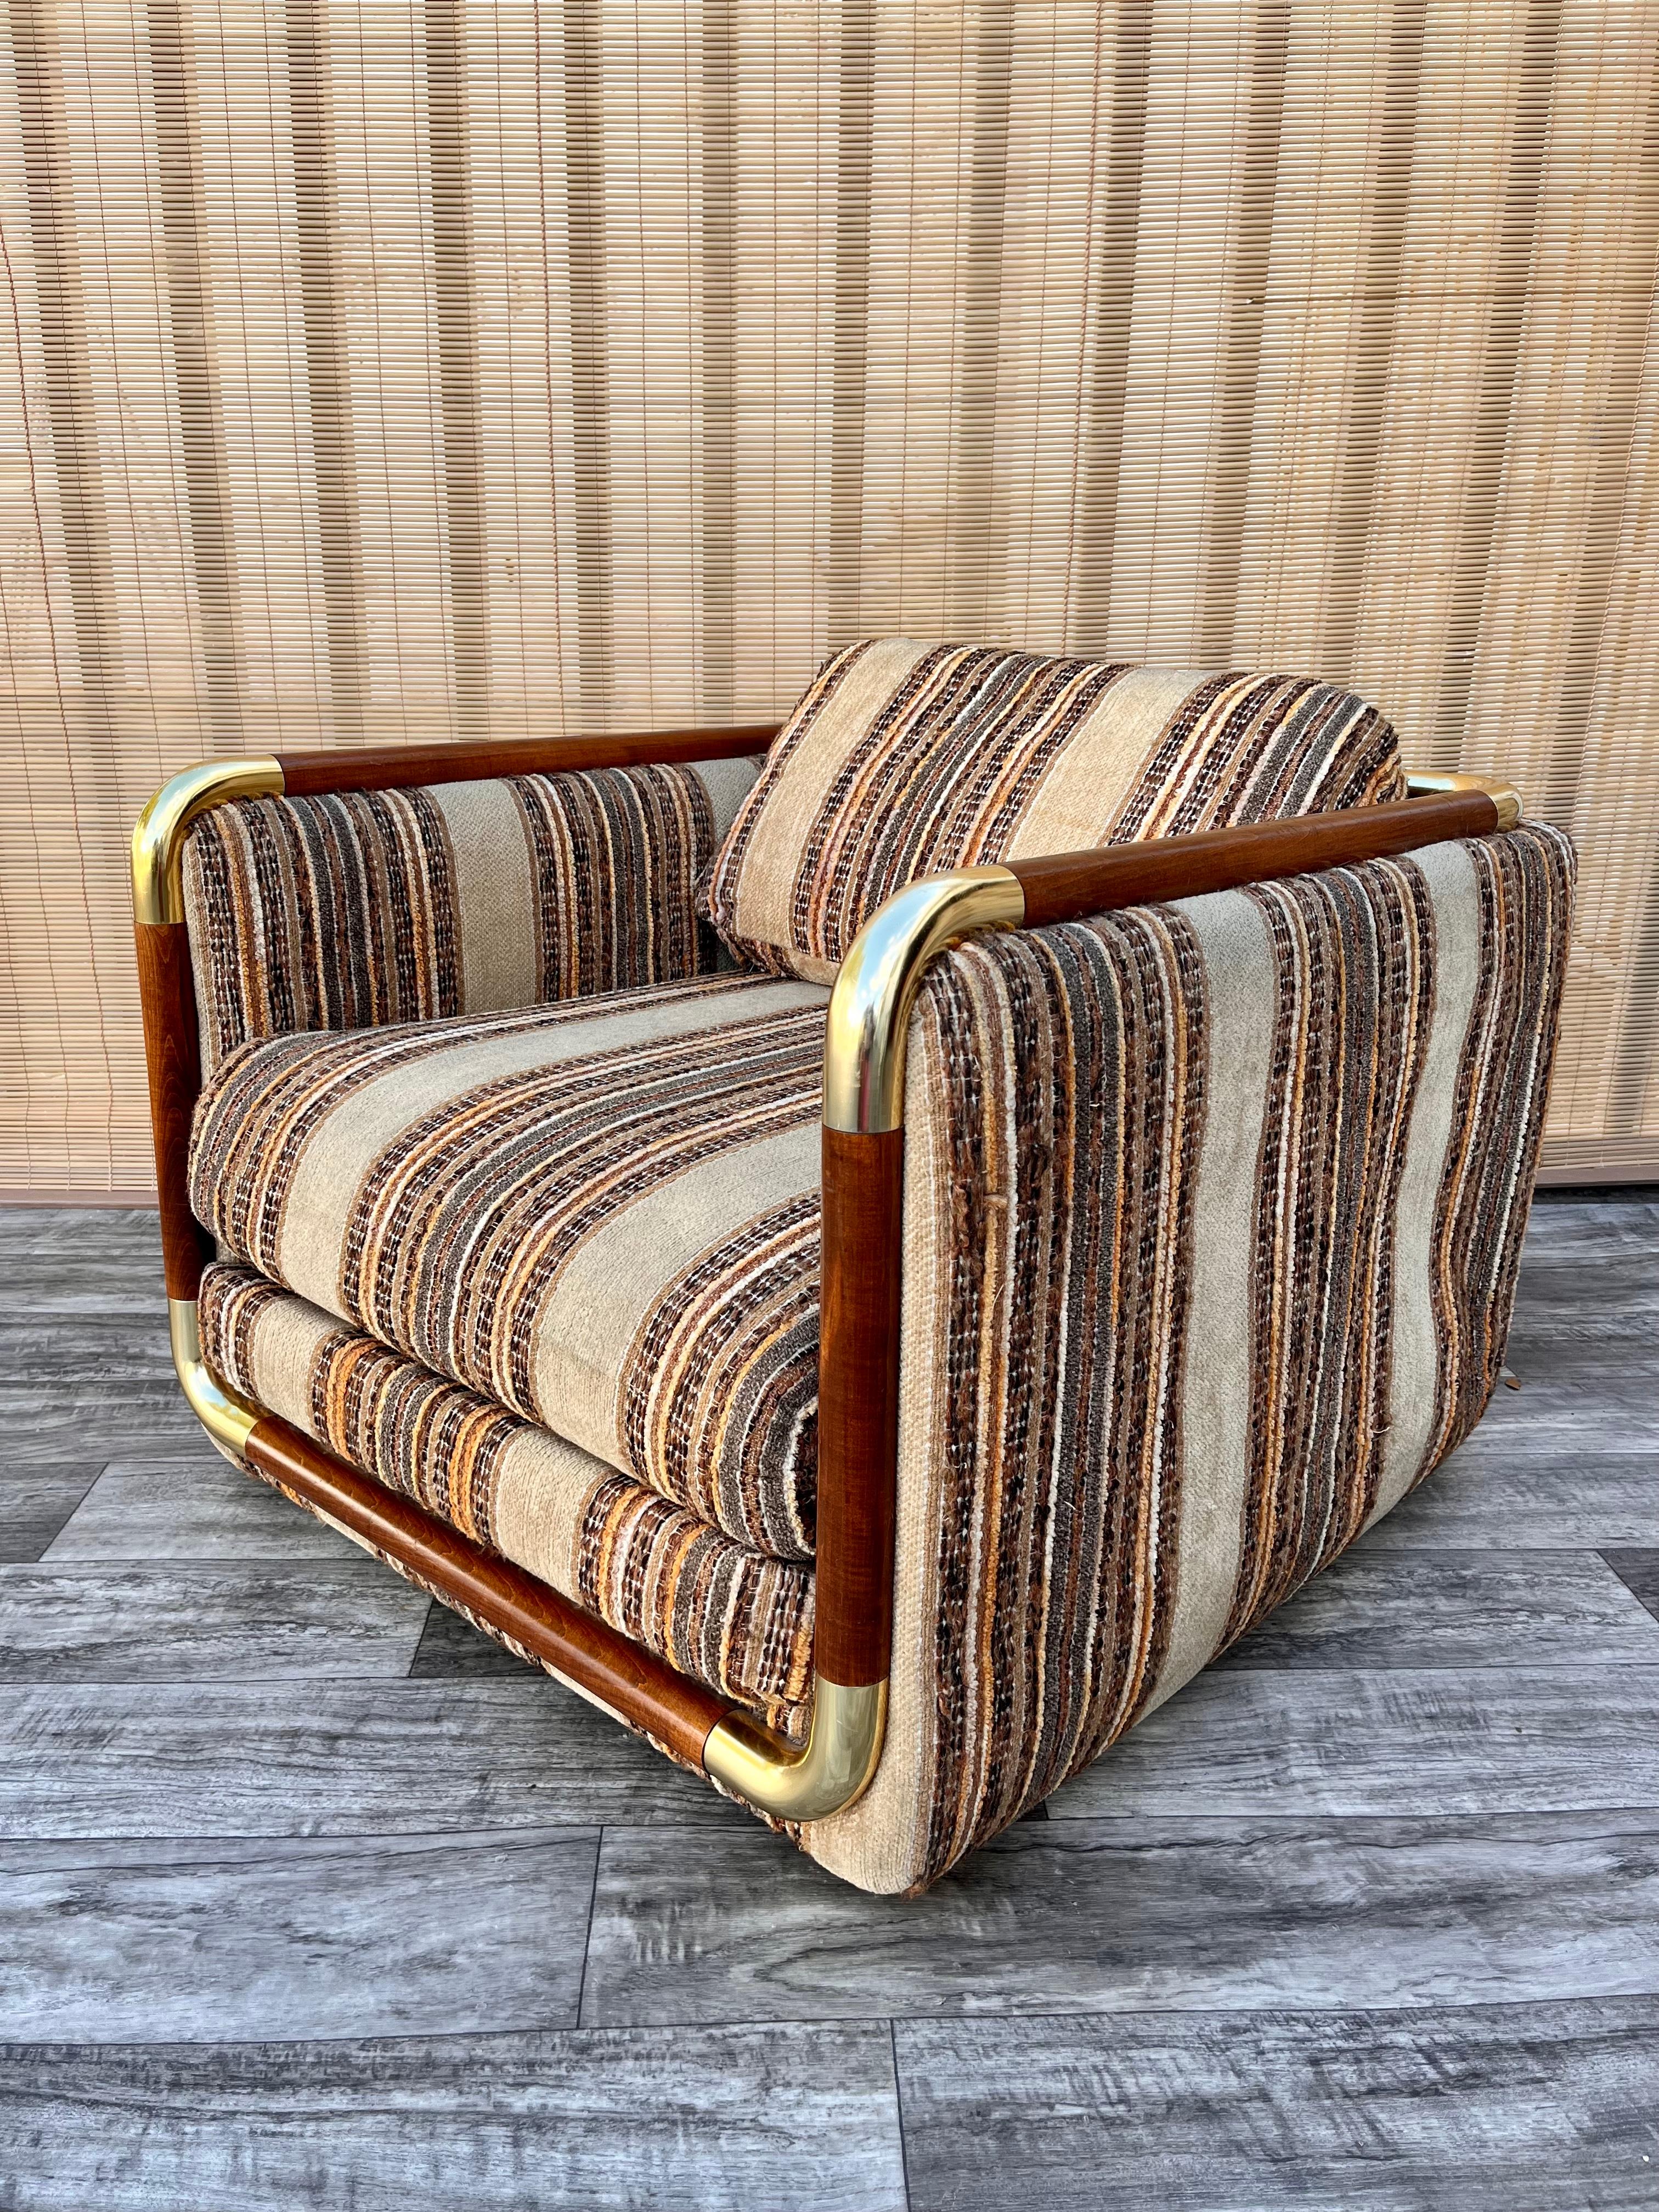 Mid Century Modern Upholstered Cube Club Chair in the Milo Baughman's Style by Schweiger Industries. Manufactured in 1985. 
Features a wood framing with rounded brass trims at corners and the original striped velvety upholstery with removable seat